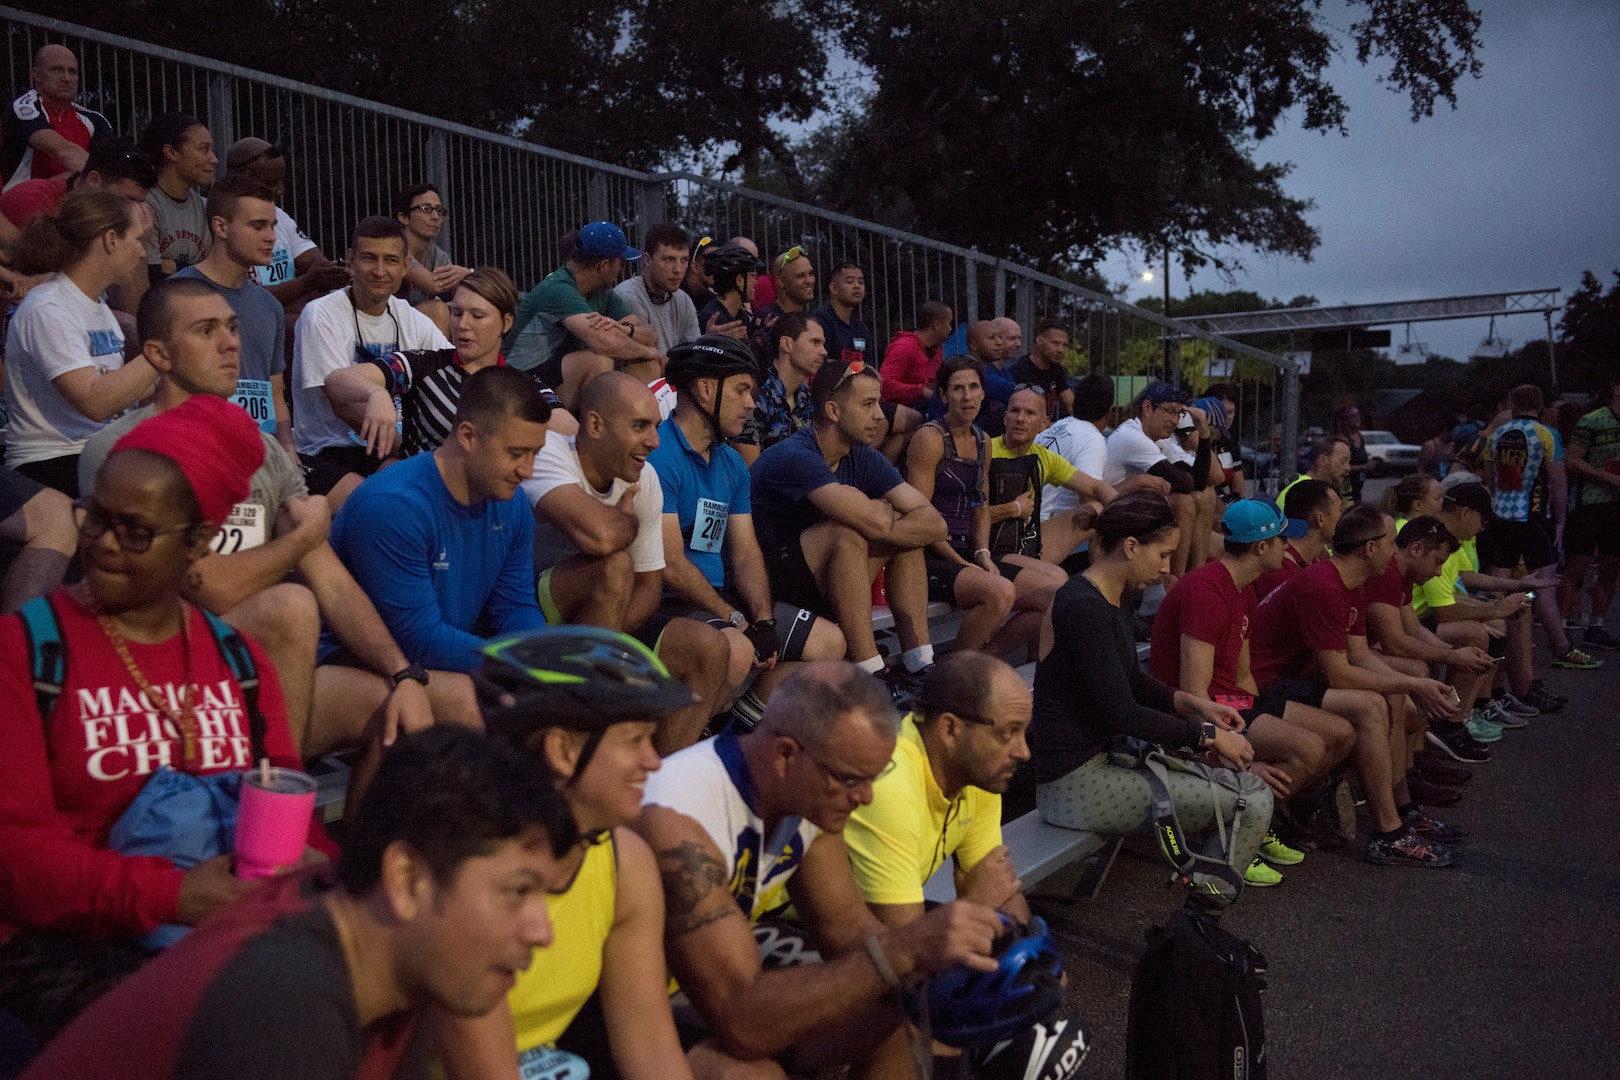 About 150 members of Joint Base San Antonio gather to compete in the annual Rambler 120 Oct. 13, 2018, at JBSA Recreation Area at Canyon Lake, Texas.